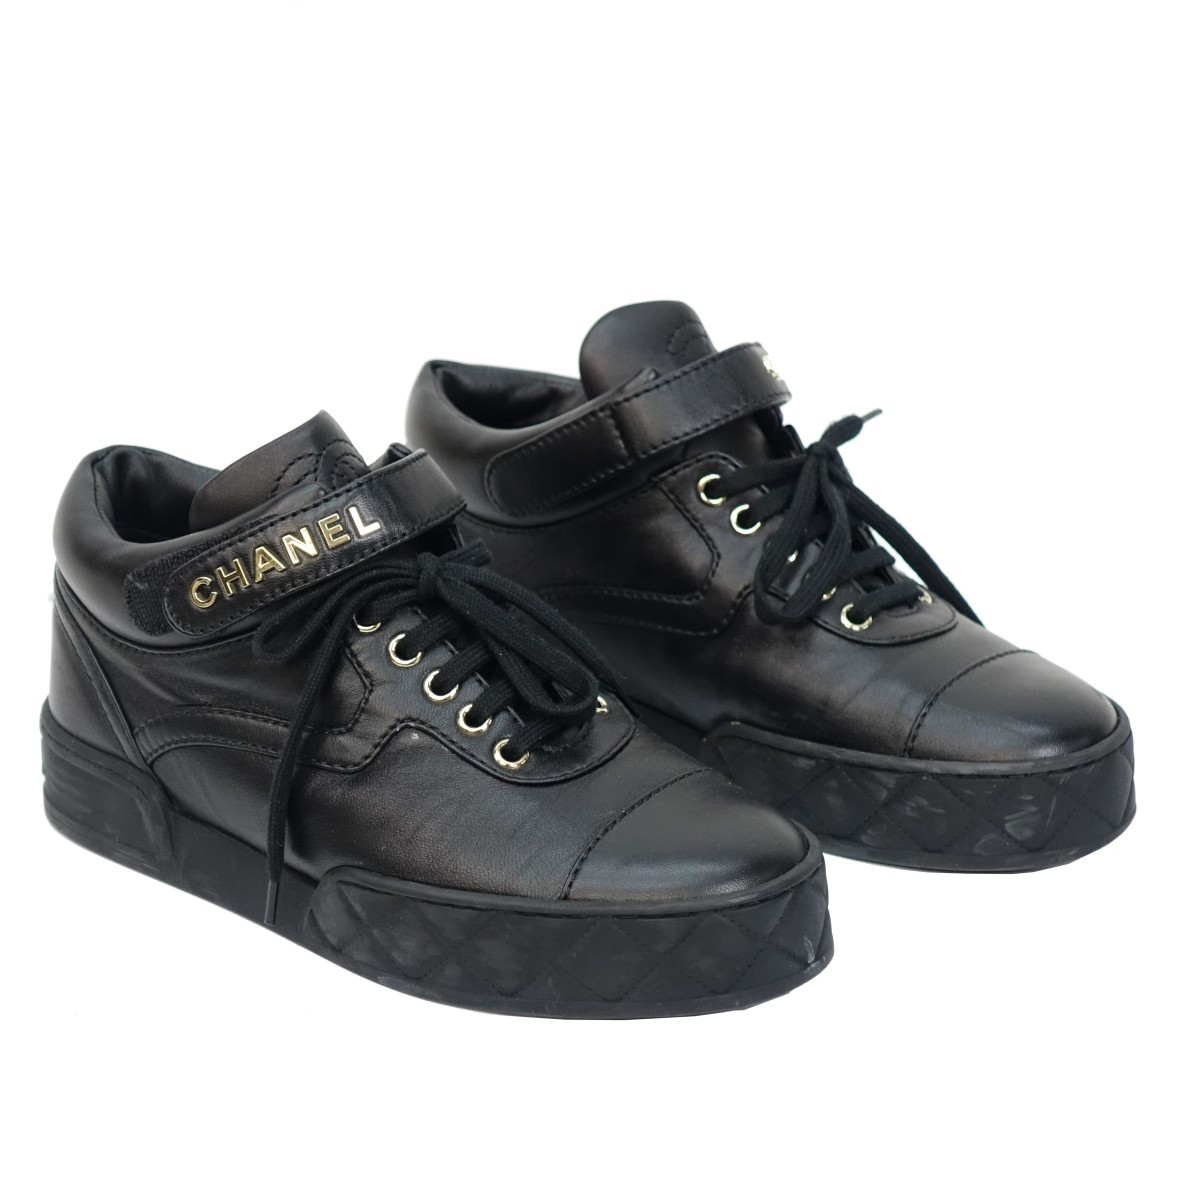 Chanel High Top Sneakers